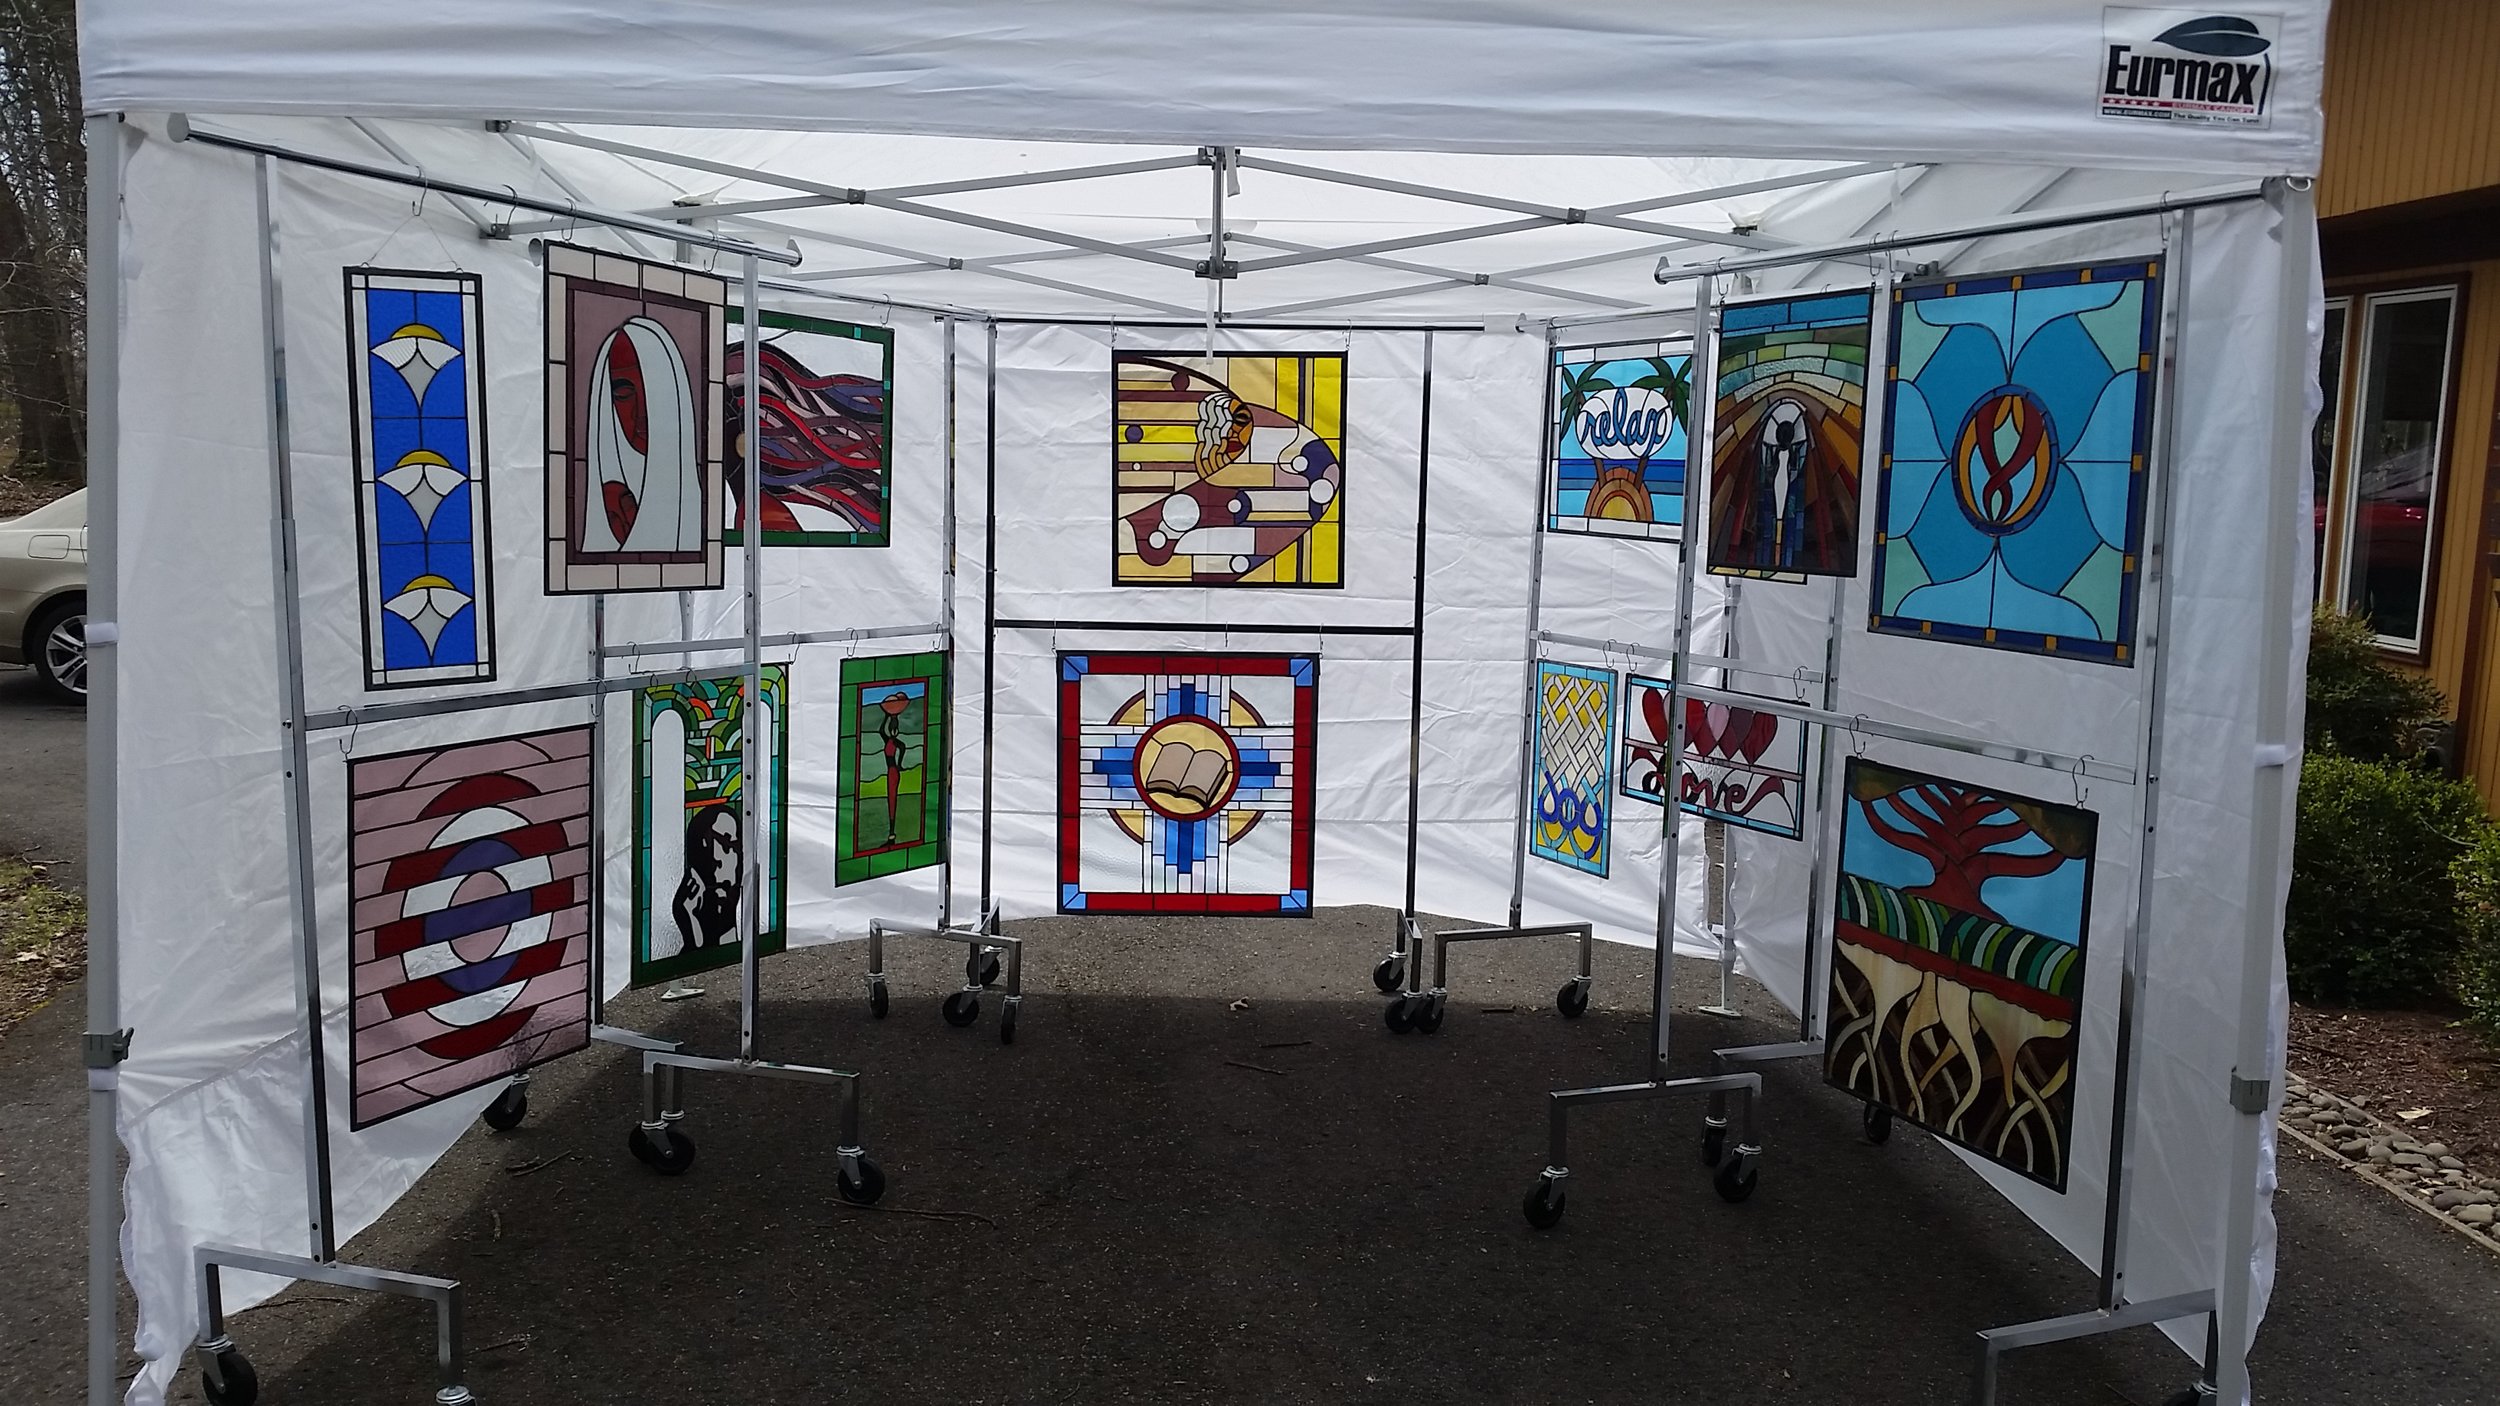 stained glass artist Arvid Lee's booth showing his work